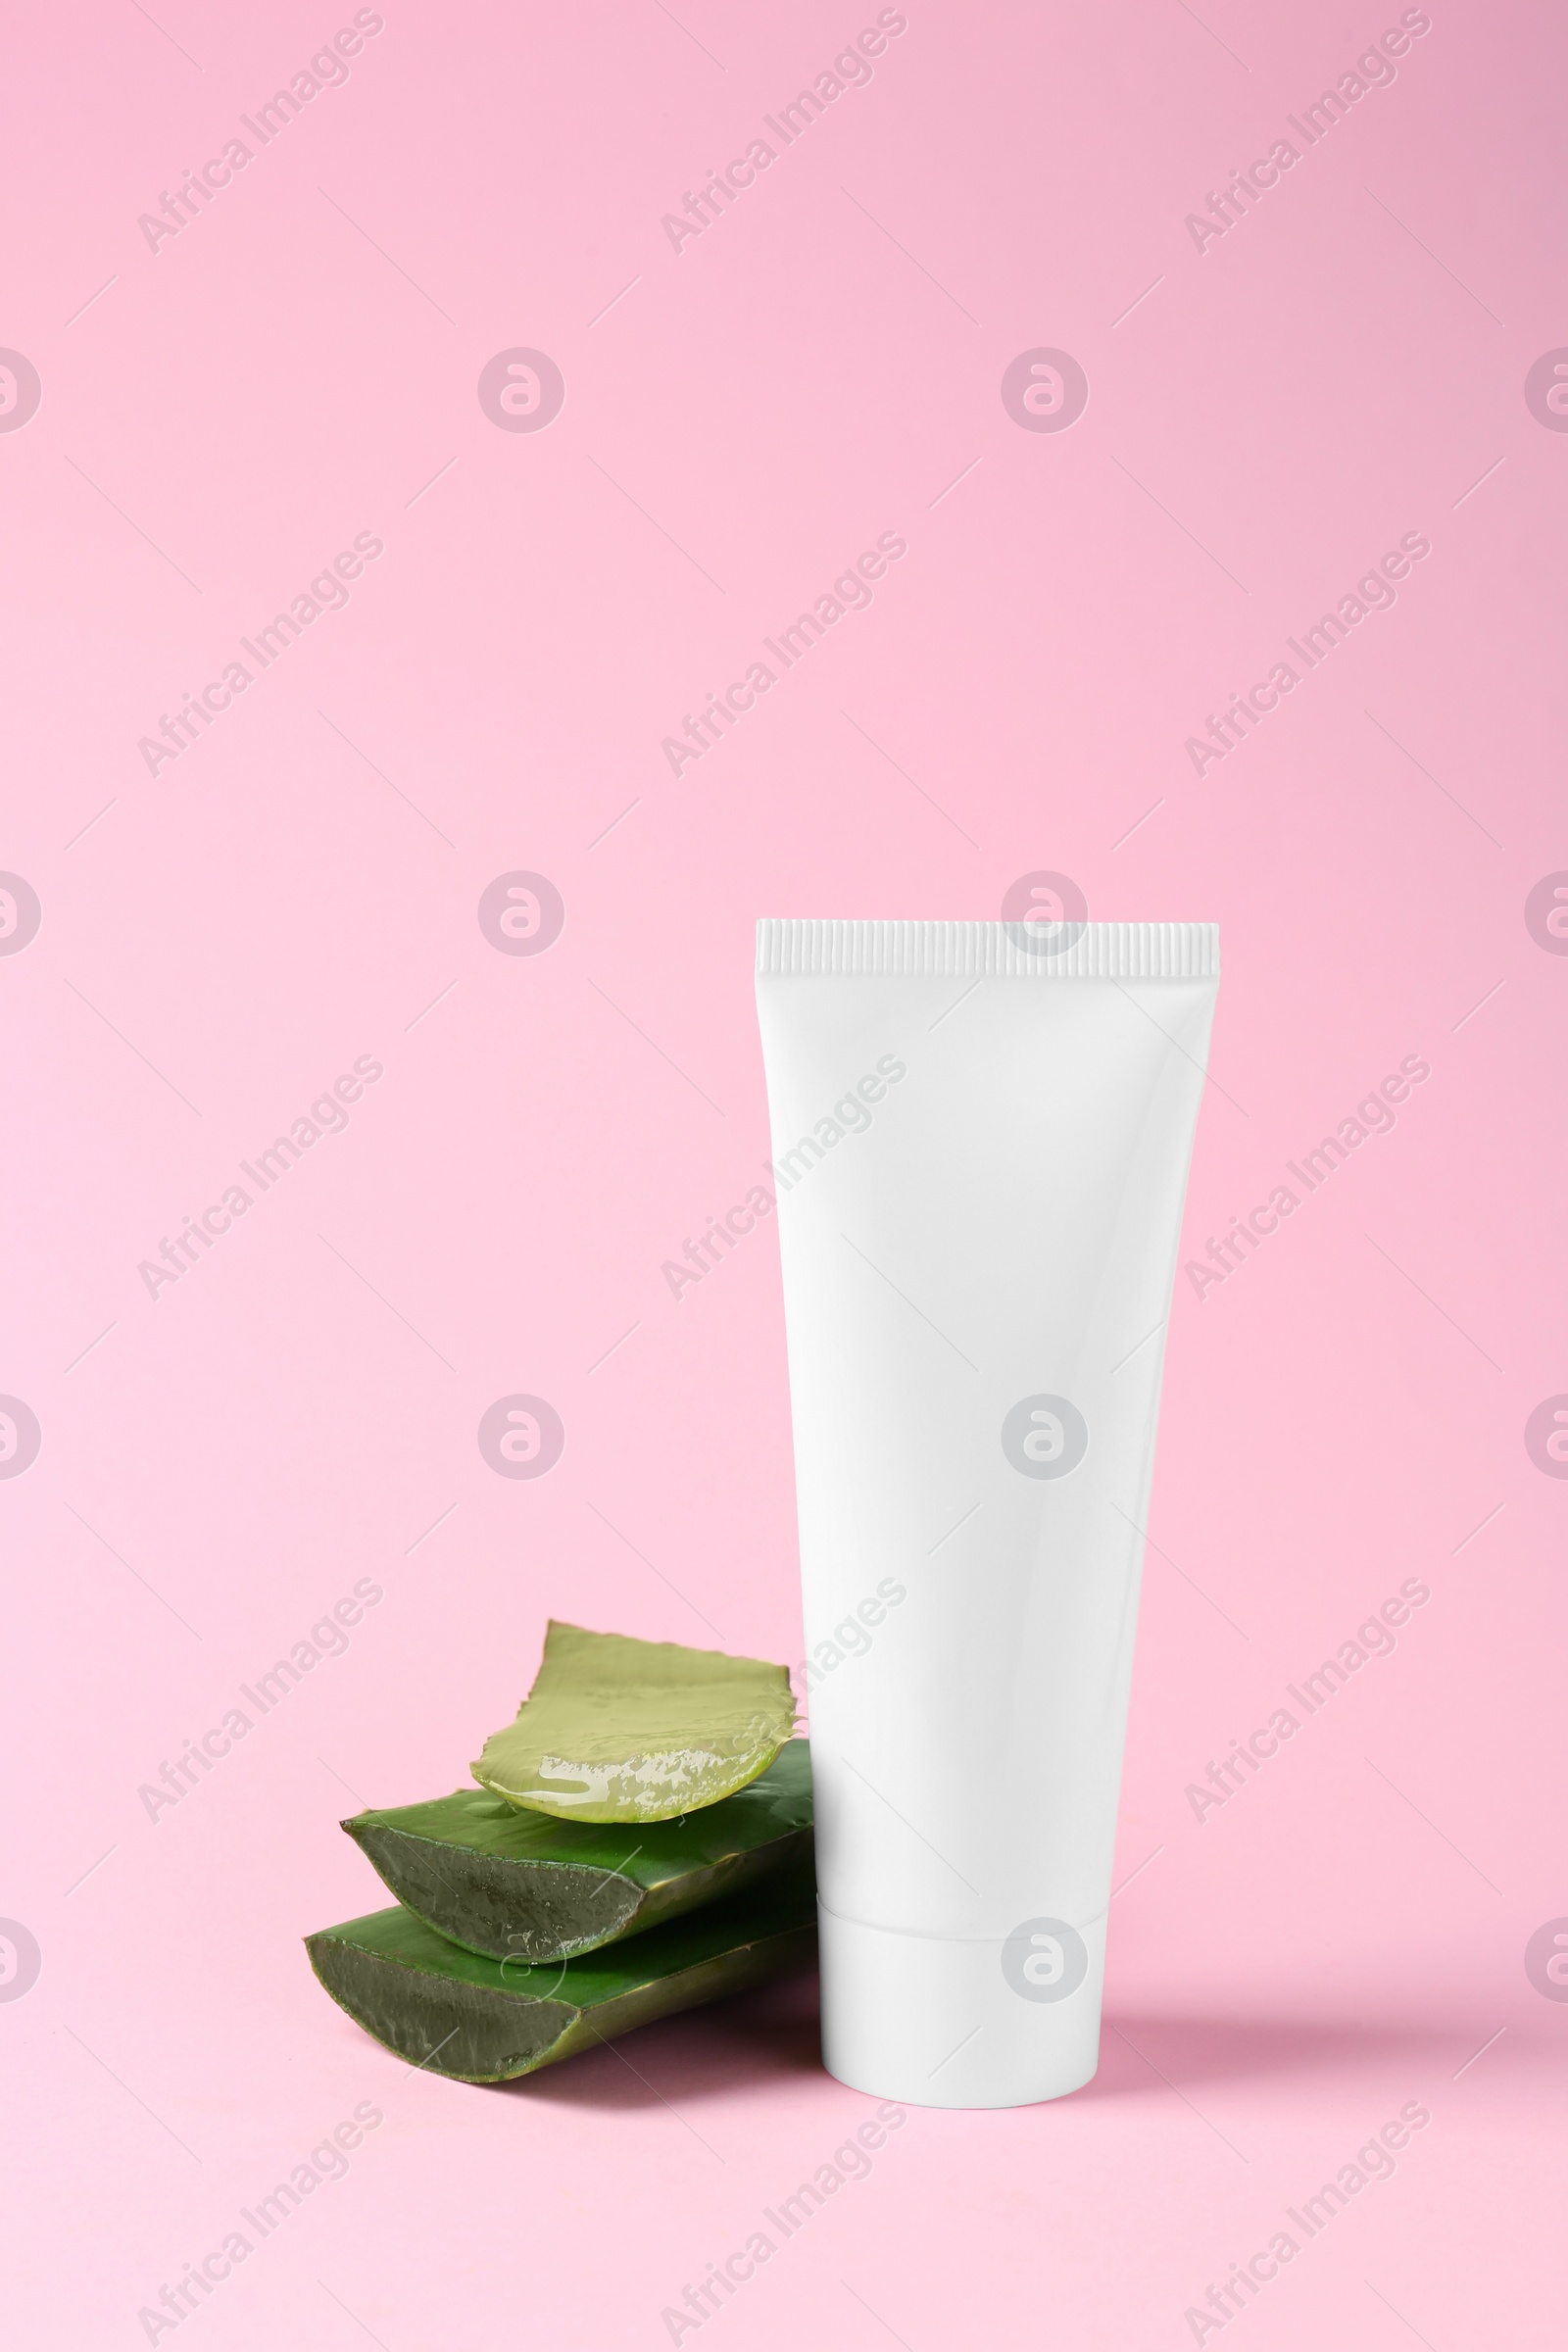 Photo of Tube of natural cream and cut aloe on pink background